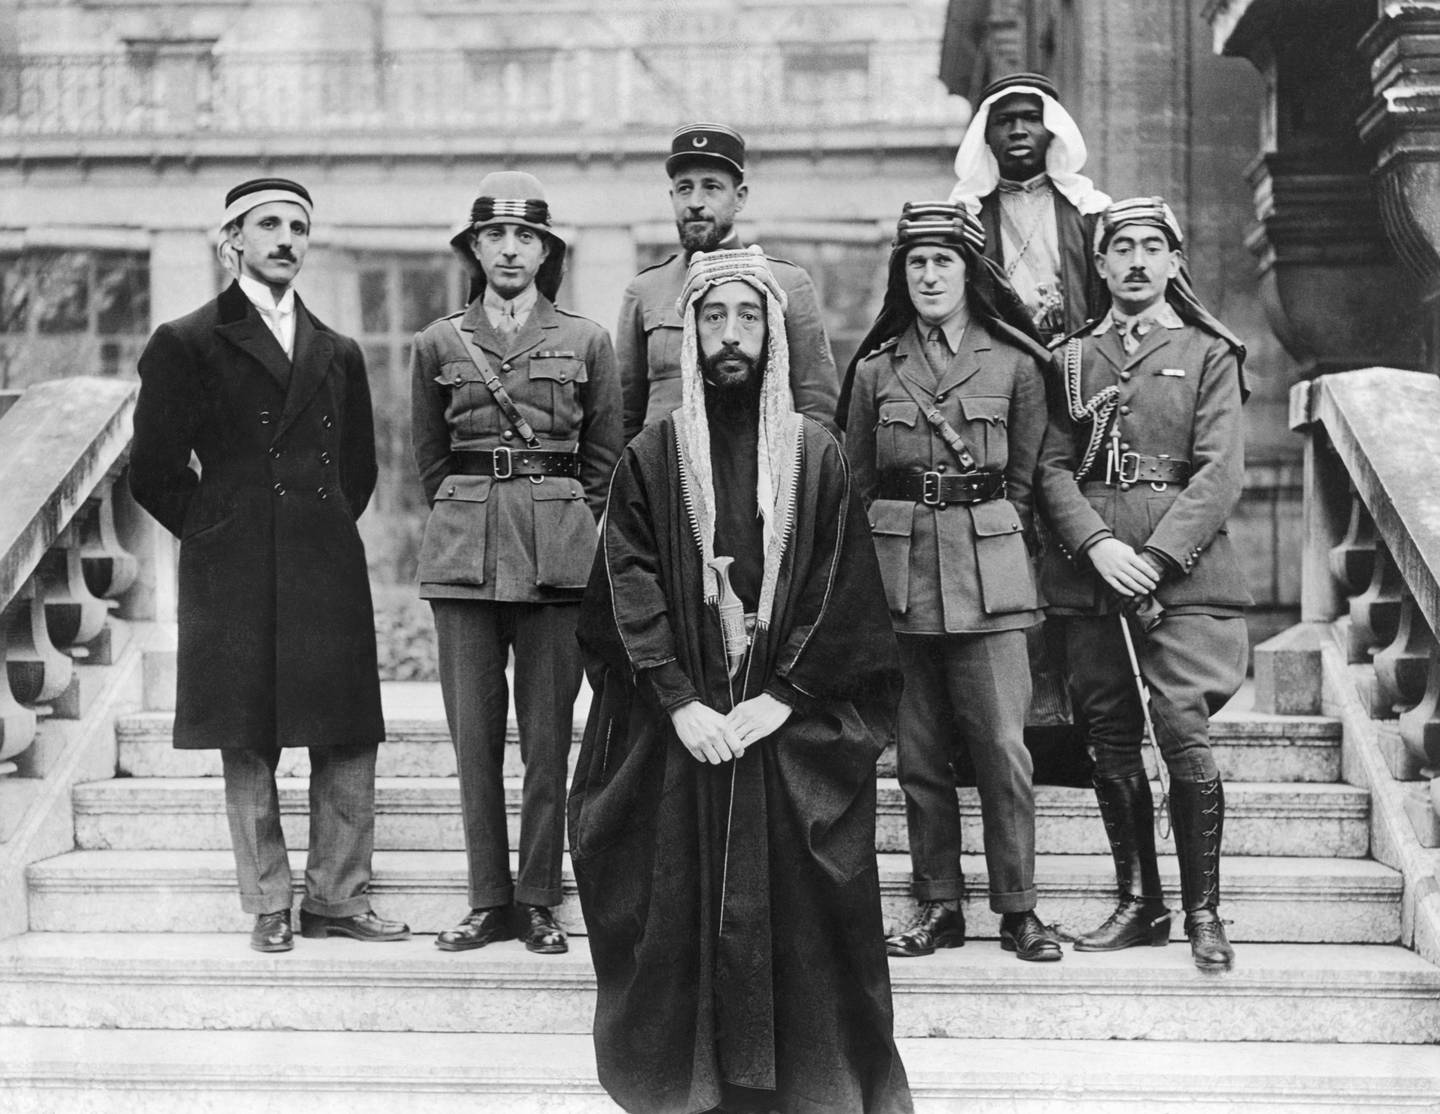 Faisal, son of Hussain of Makkah, with his delegates and advisors at the Versailles peace conference on January 22, 1919. Faisal was briefly king of Syria, and later Iraq. Behind him are (left to right) his private secretary and fellow delegate Rustem Haidar; Brig Gen Nuri Said of Baghdad; Capt Pisani of France; Col T. E. Lawrence 'of Arabia'; unidentified man; and Hassan Kadri.